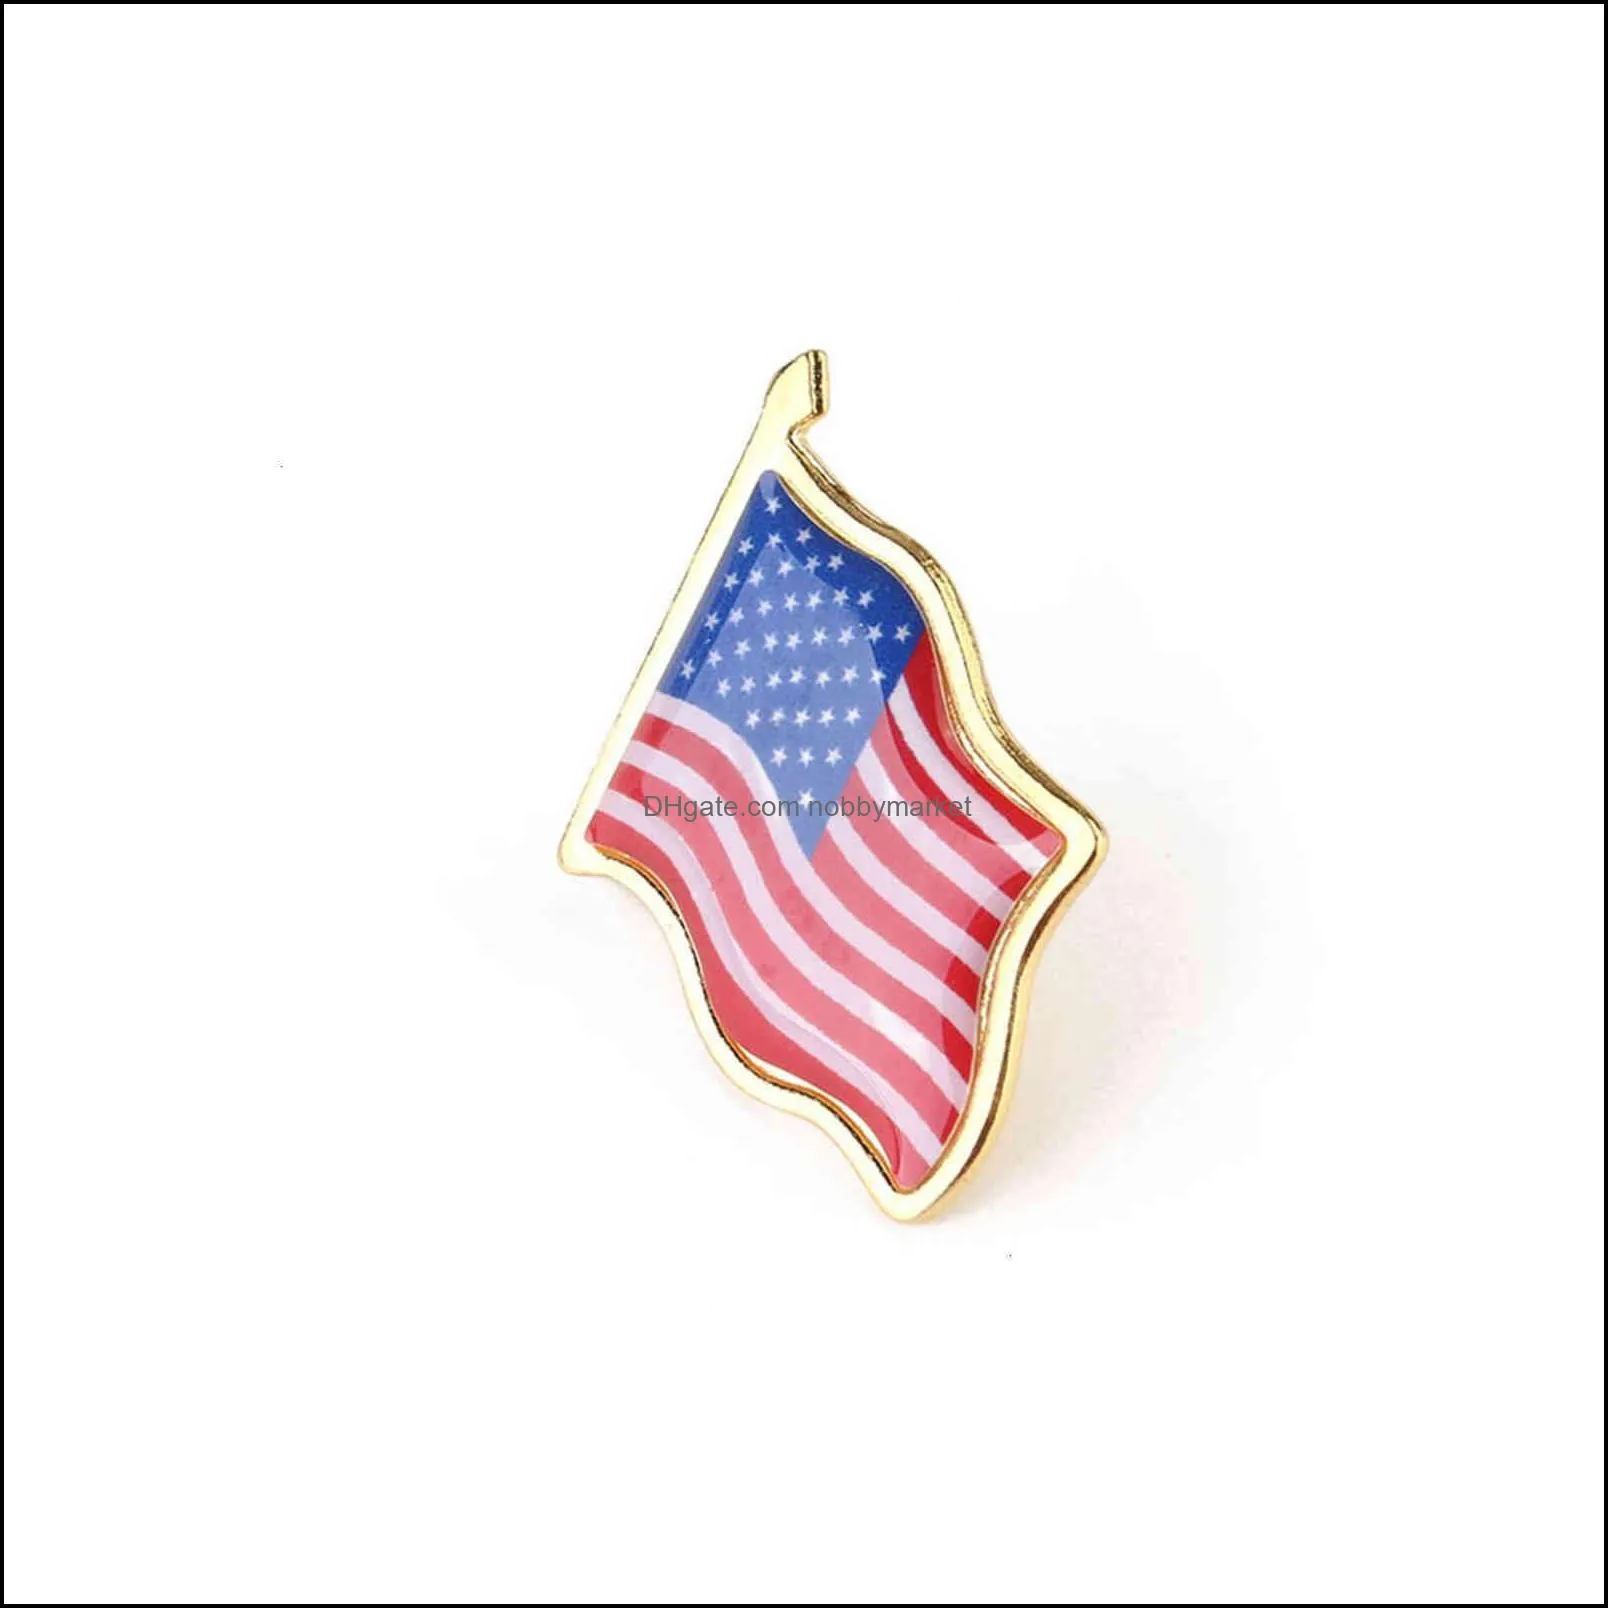 Brand Brooch 10pcs/lot American Flag Lapel Pin United States USA Hat Tie Tack Badge Pins Mini Brooches for Clothes Bags